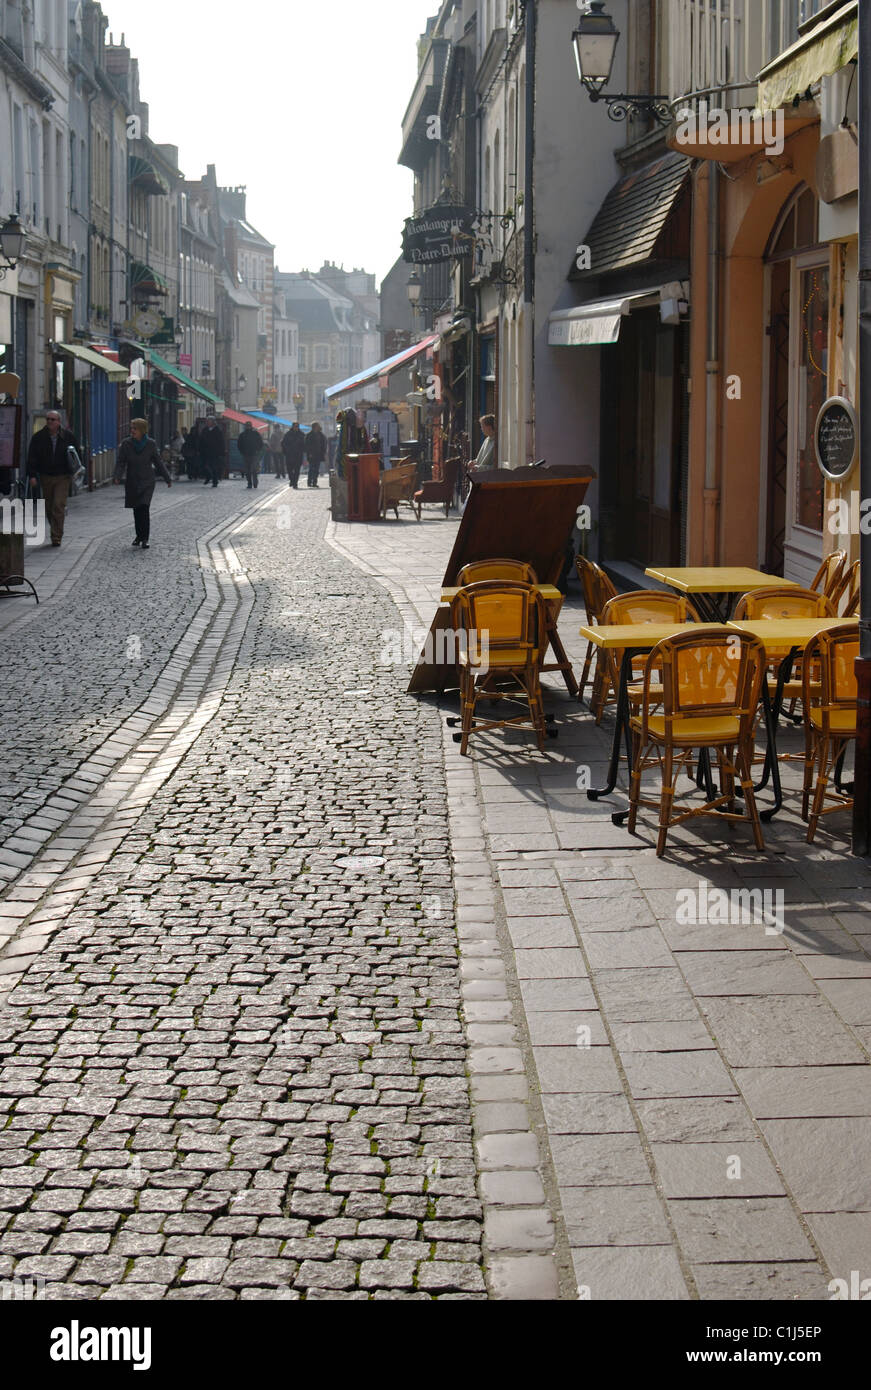 Cobbled street in the Old Town of Boulogne in the Pas de Calais region of France. Stock Photo